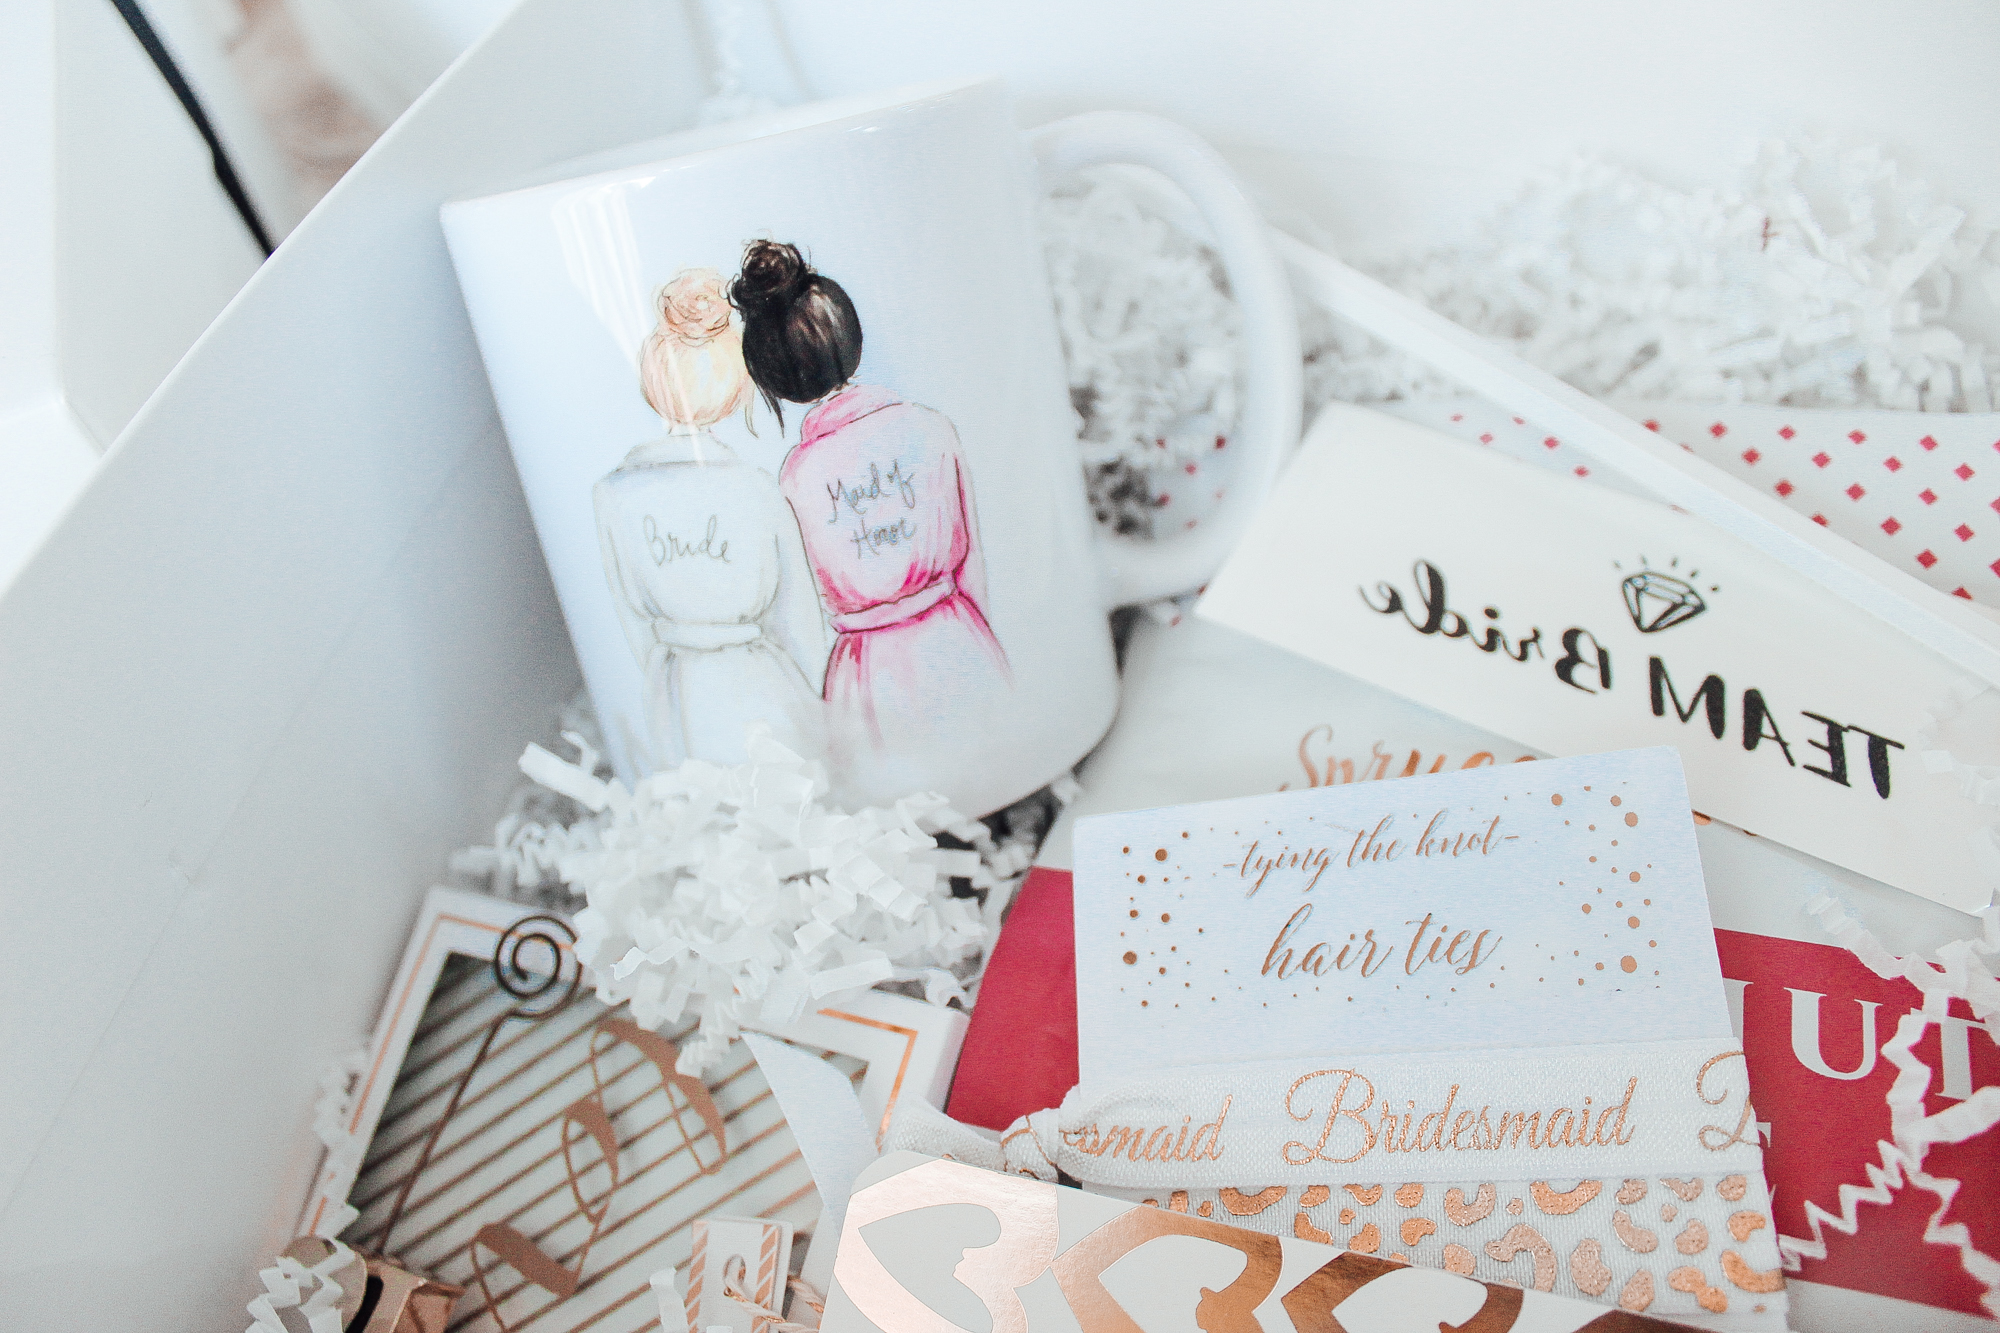 Blondie in the City | Let's Have Tea With The Bride To Be | How To Ask Your Bridesmaids